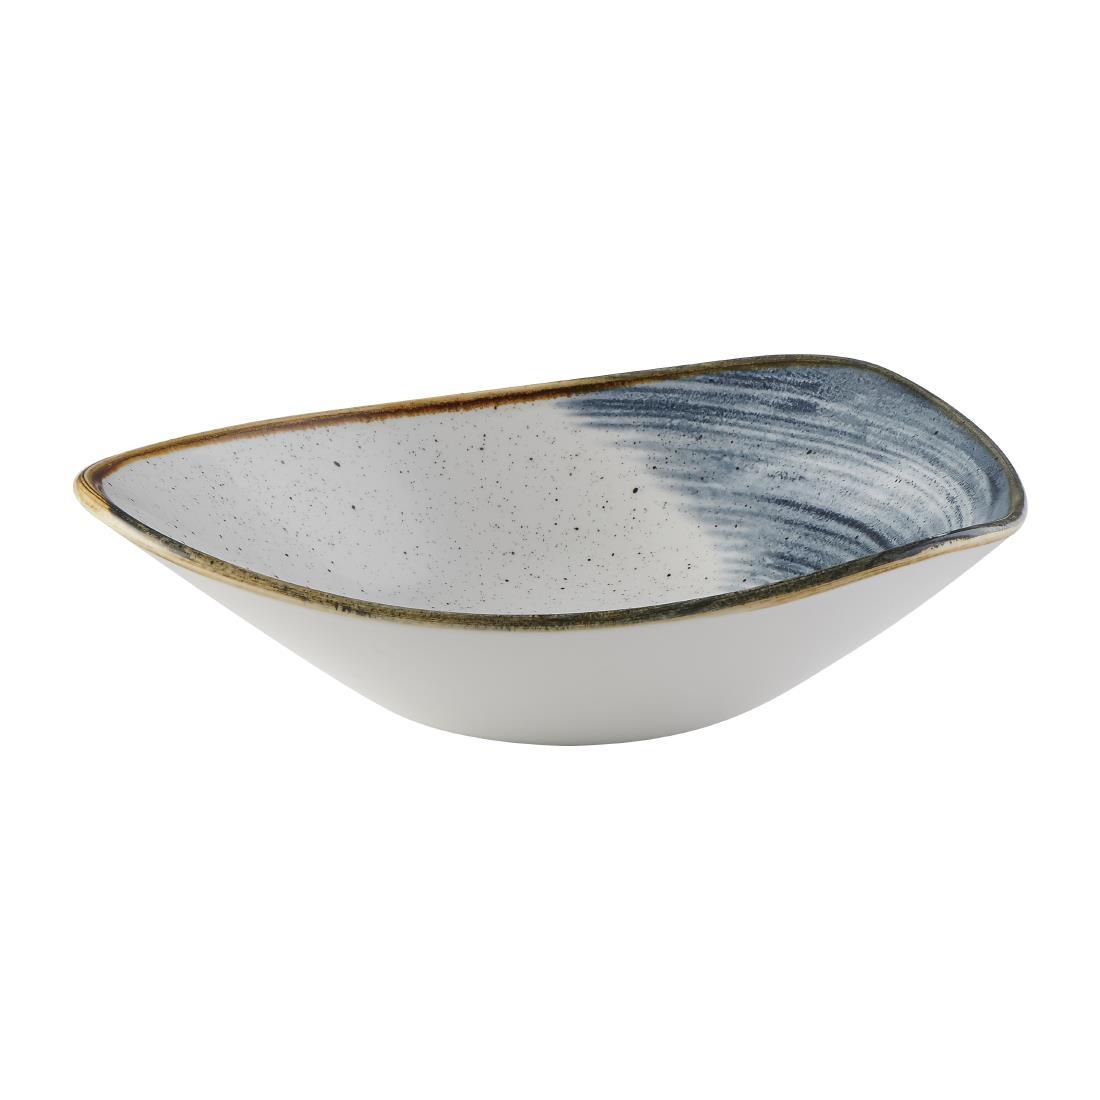 Churchill Stonecast Accents Lotus Bowl Blueberry 229mm (Pack of 12) - FS876  - 2